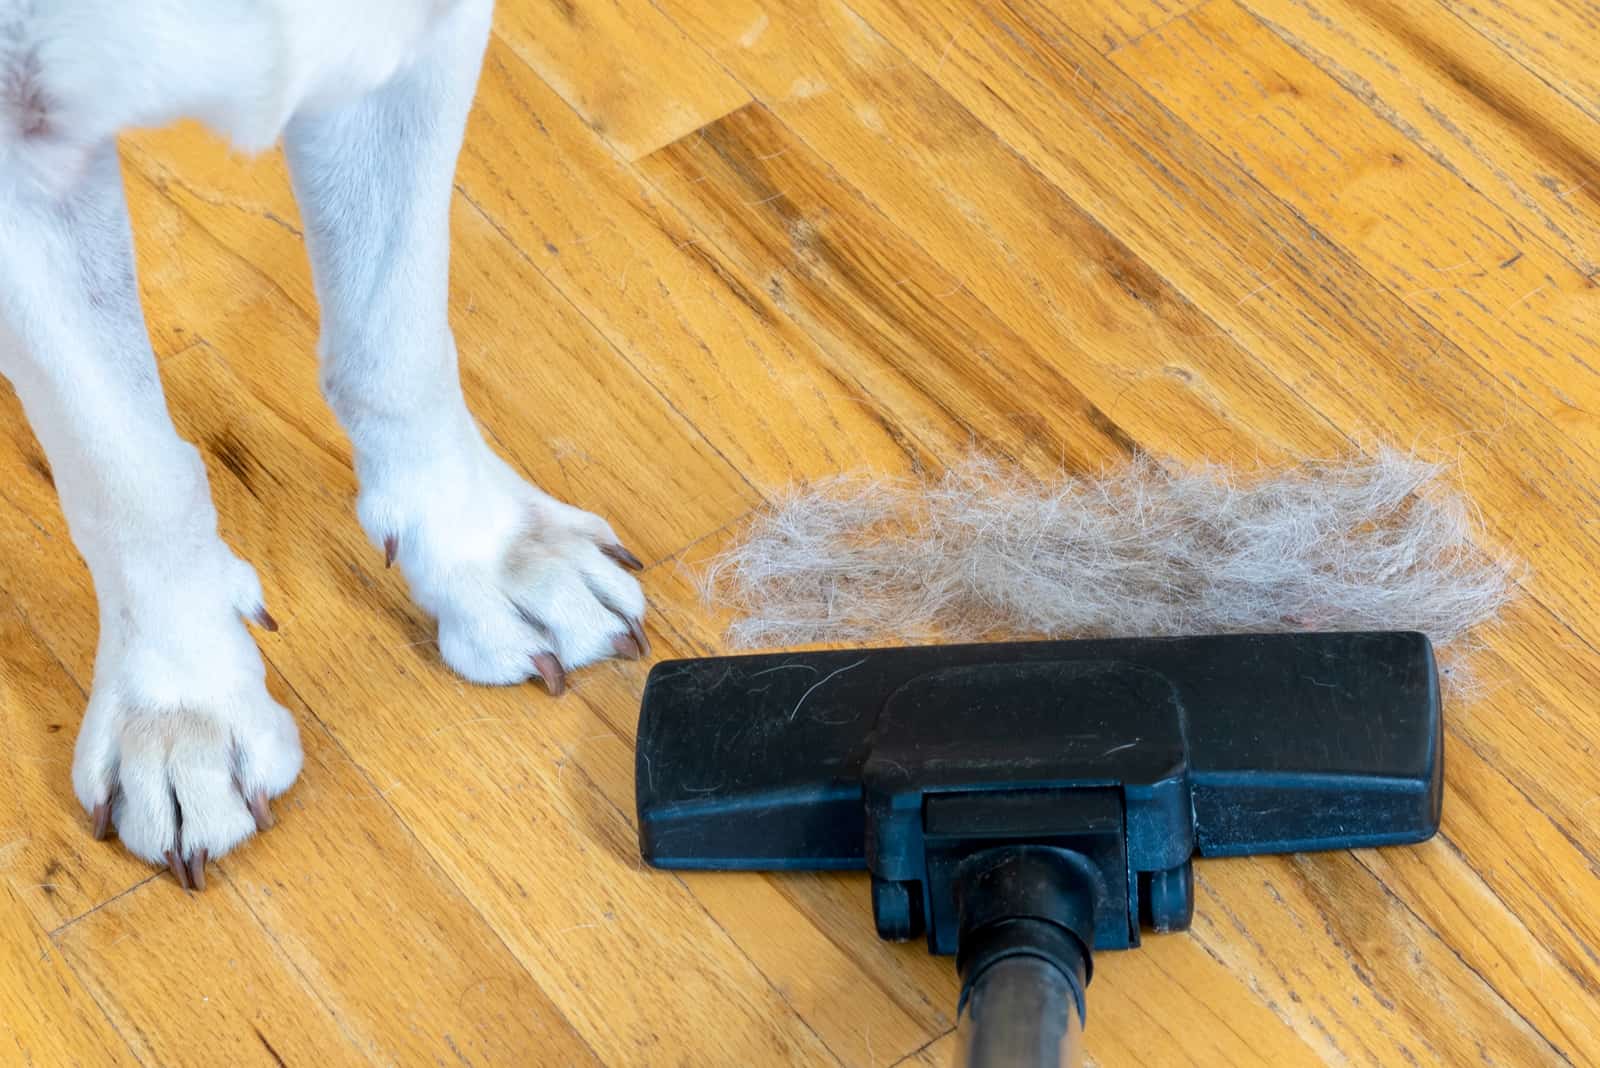 cleaning dog hair from laminate